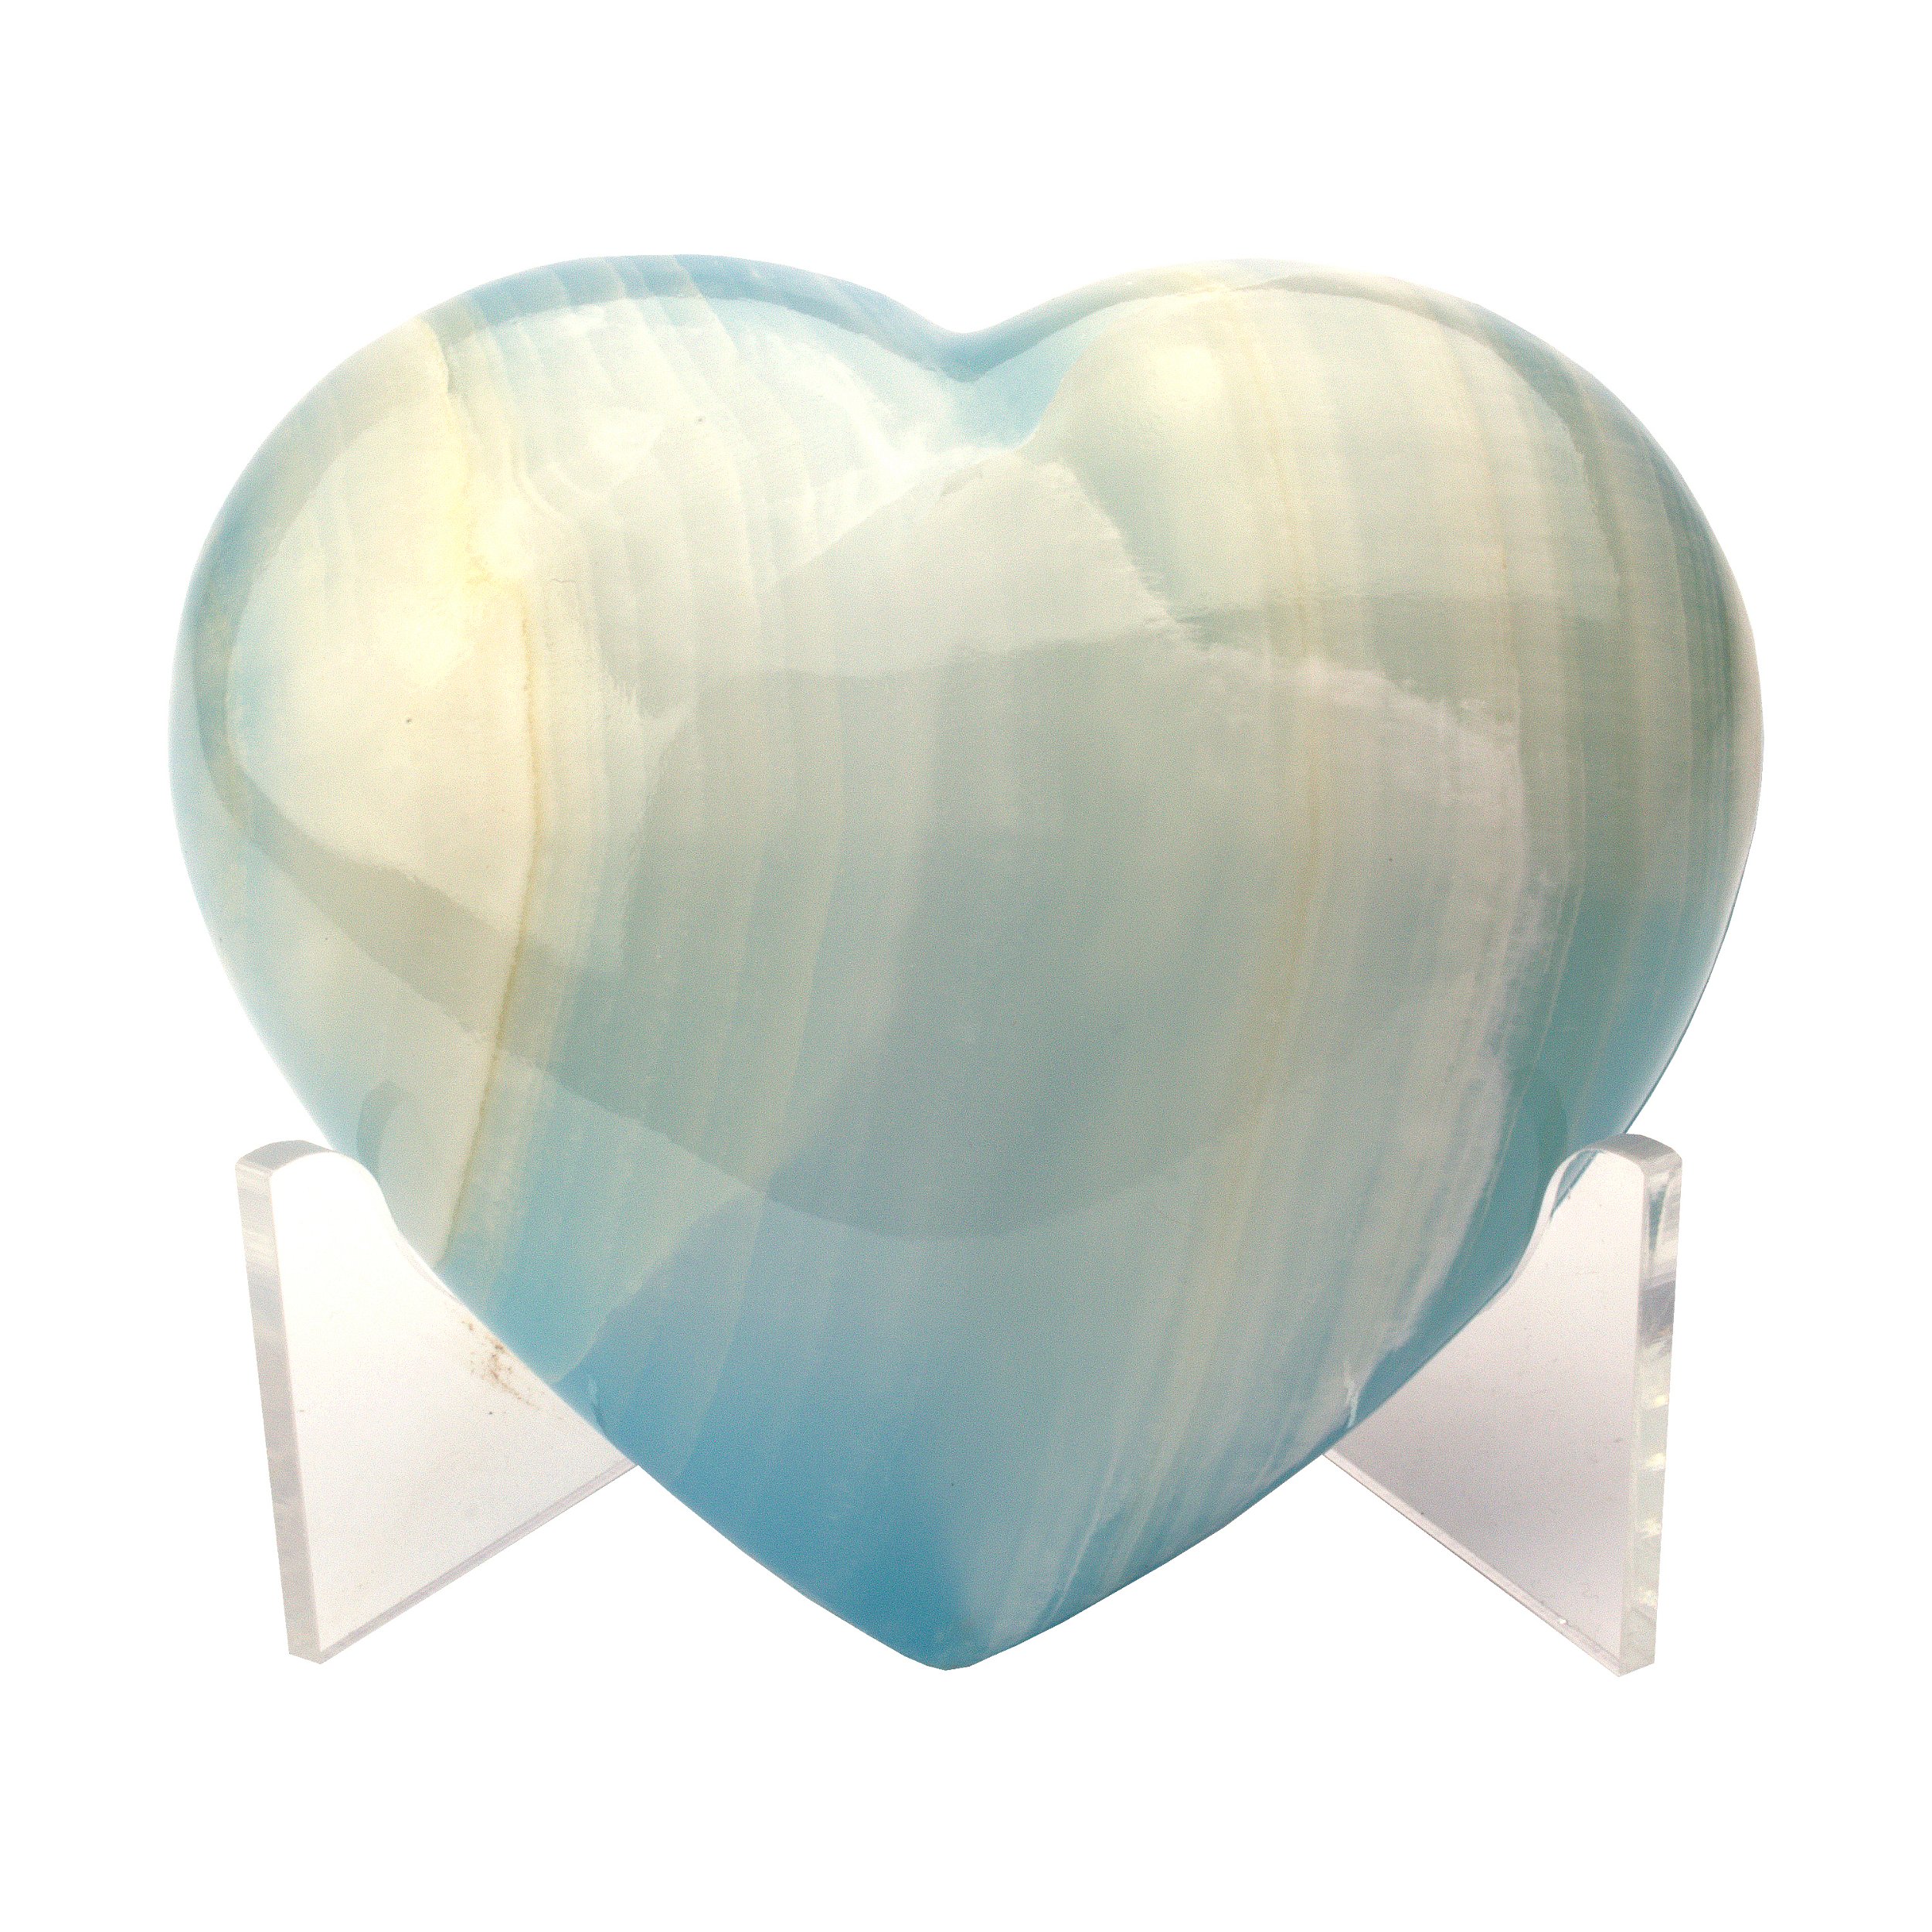 Onyx Heart with Dyed Blue Adhesive